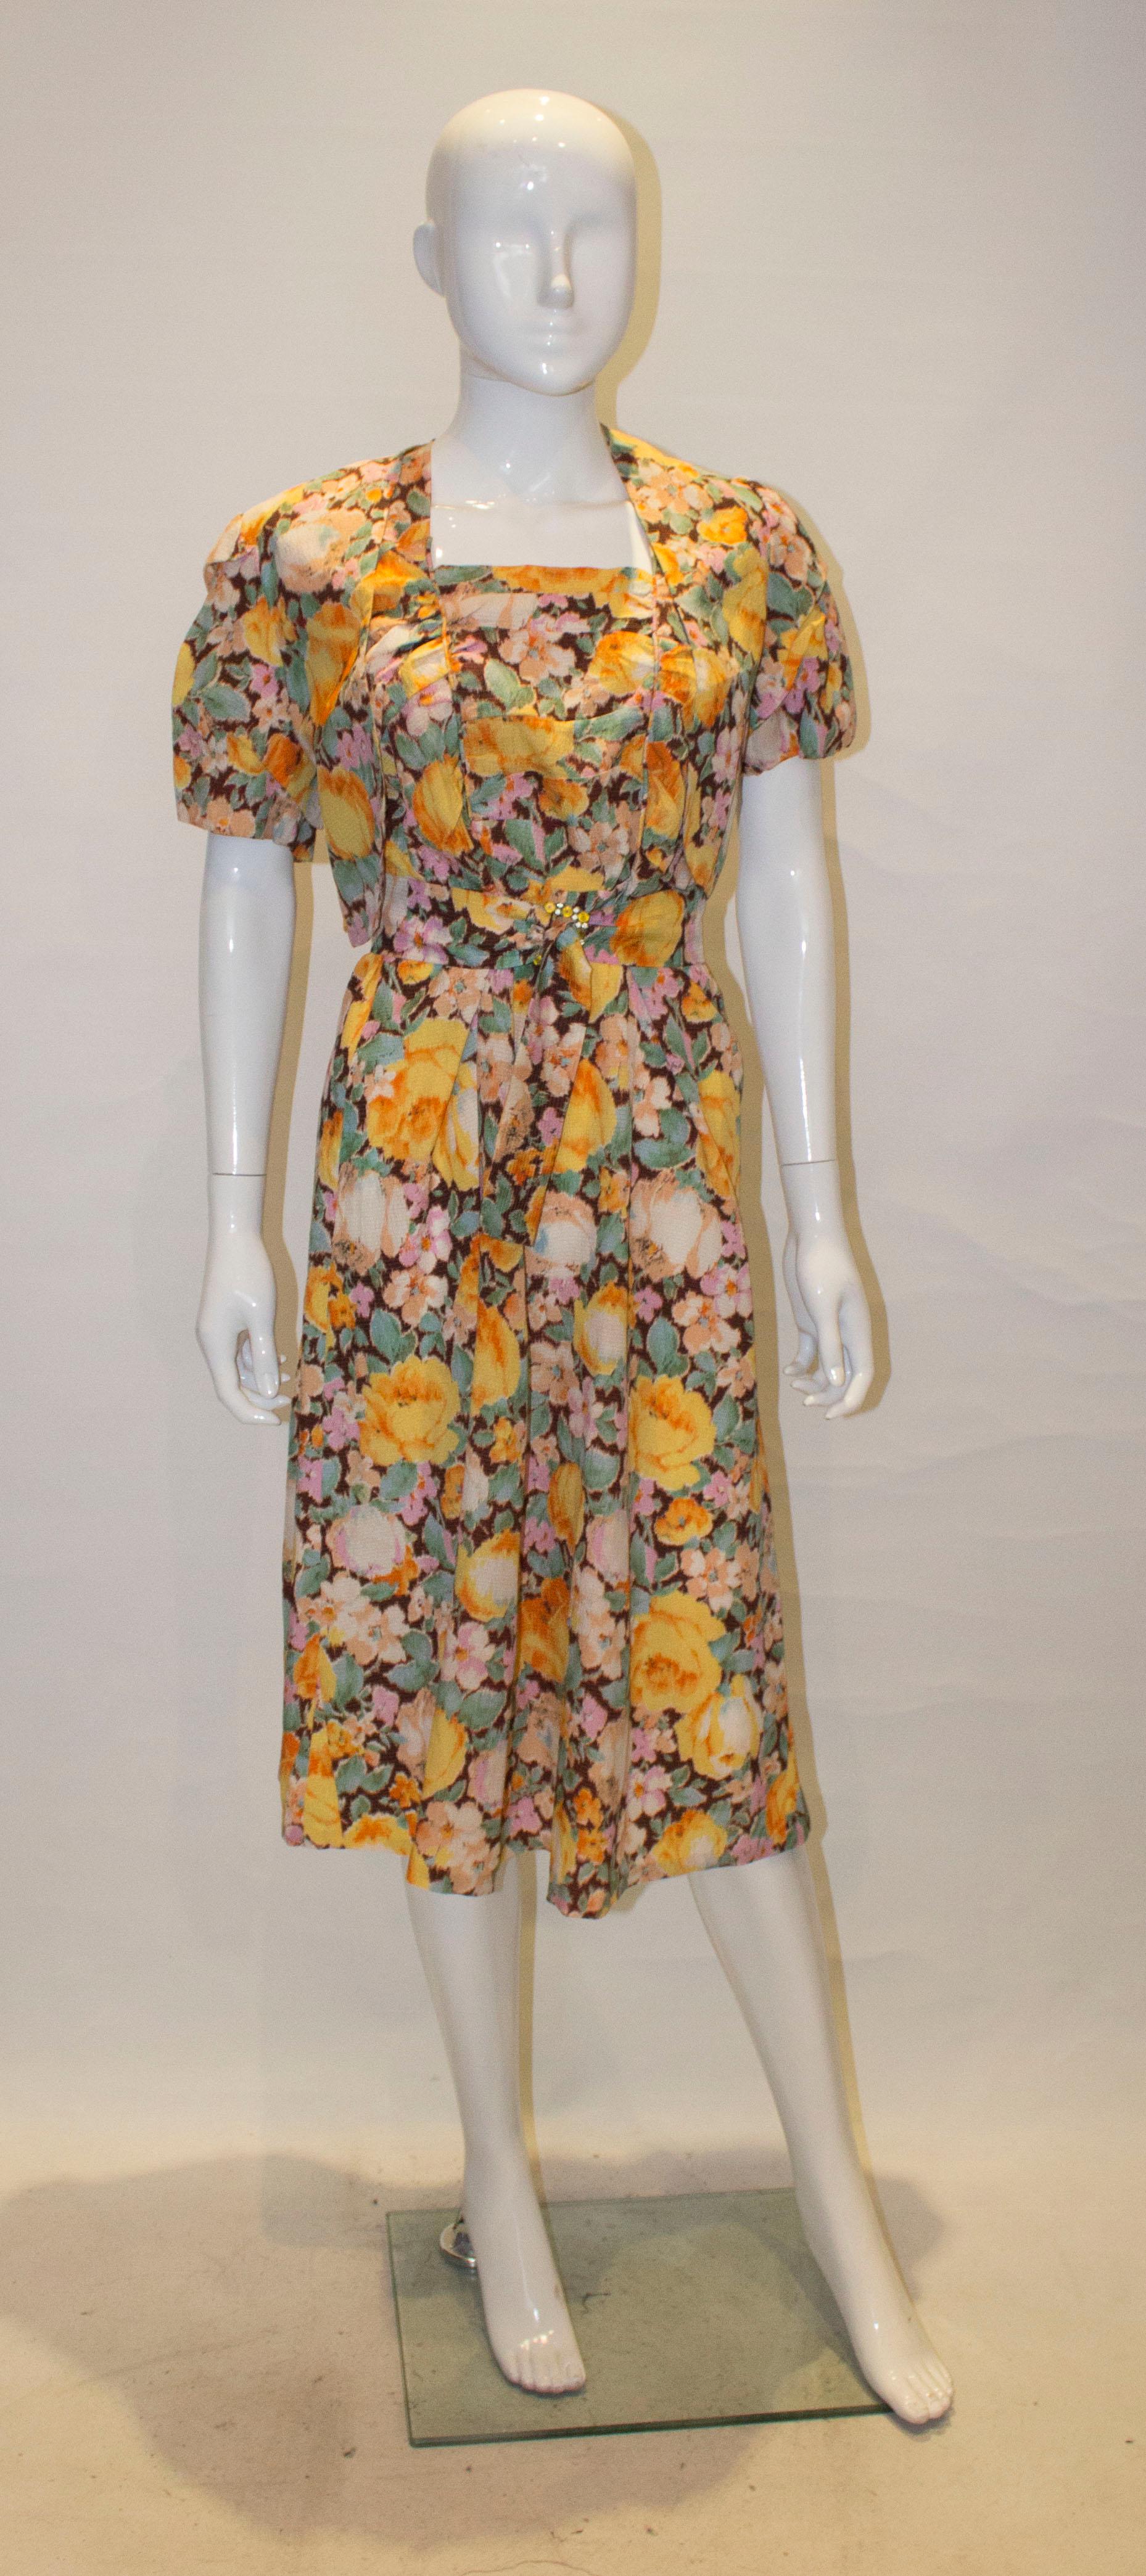 A pretty vintage dress from the 1940s. In a floral print of brown , yellow, green and beige, the dress has a square neckline with pleat detail at the front. There is a matching bolero, and self fabric belt.

Measurements: Dress bust 35'',length